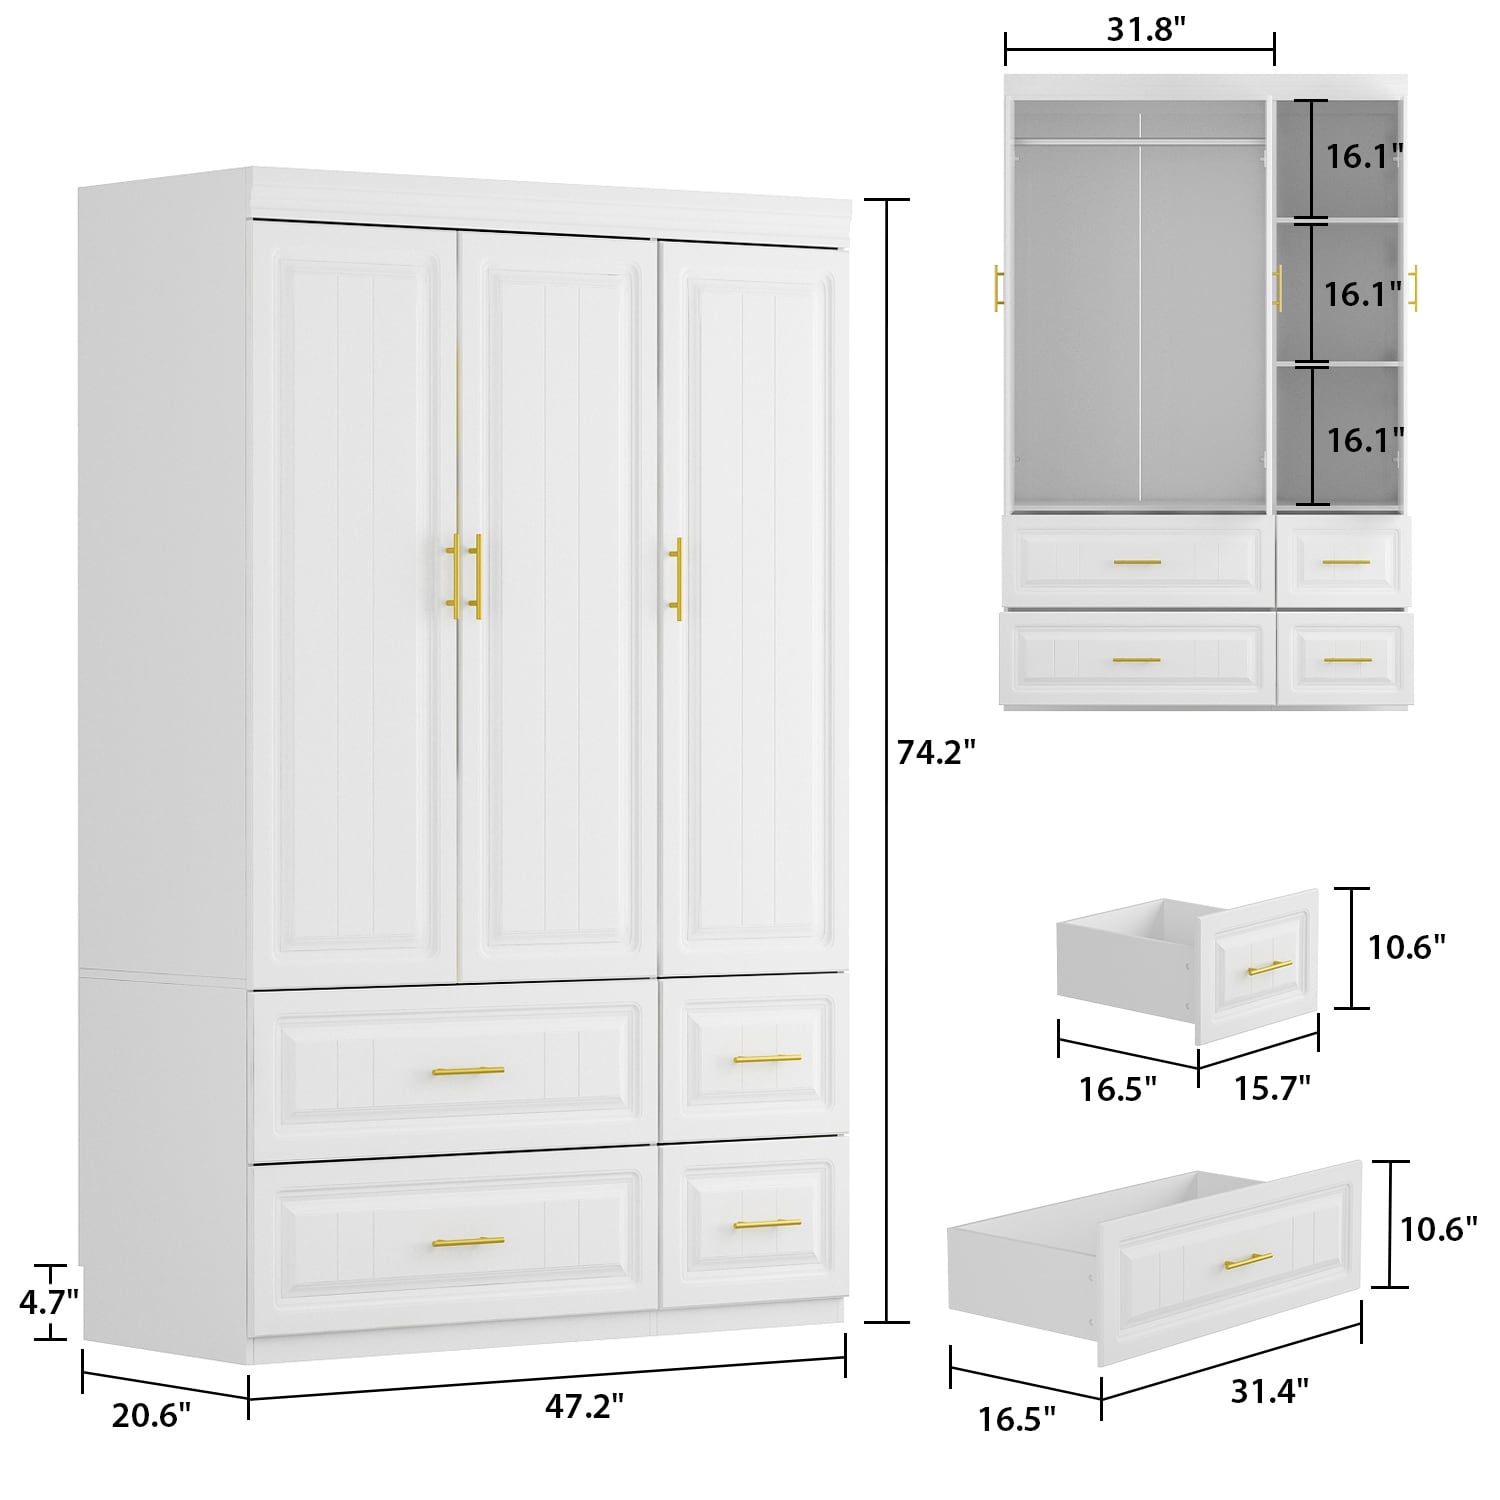 https://ak1.ostkcdn.com/images/products/is/images/direct/b29e1edaf150c33ae4e0ba636bd974d858eb4ac2/FUFU%26GAGA-Large-Armoire-Combo-Wardrobes-Closet-Storage-Cabinet-White.jpg